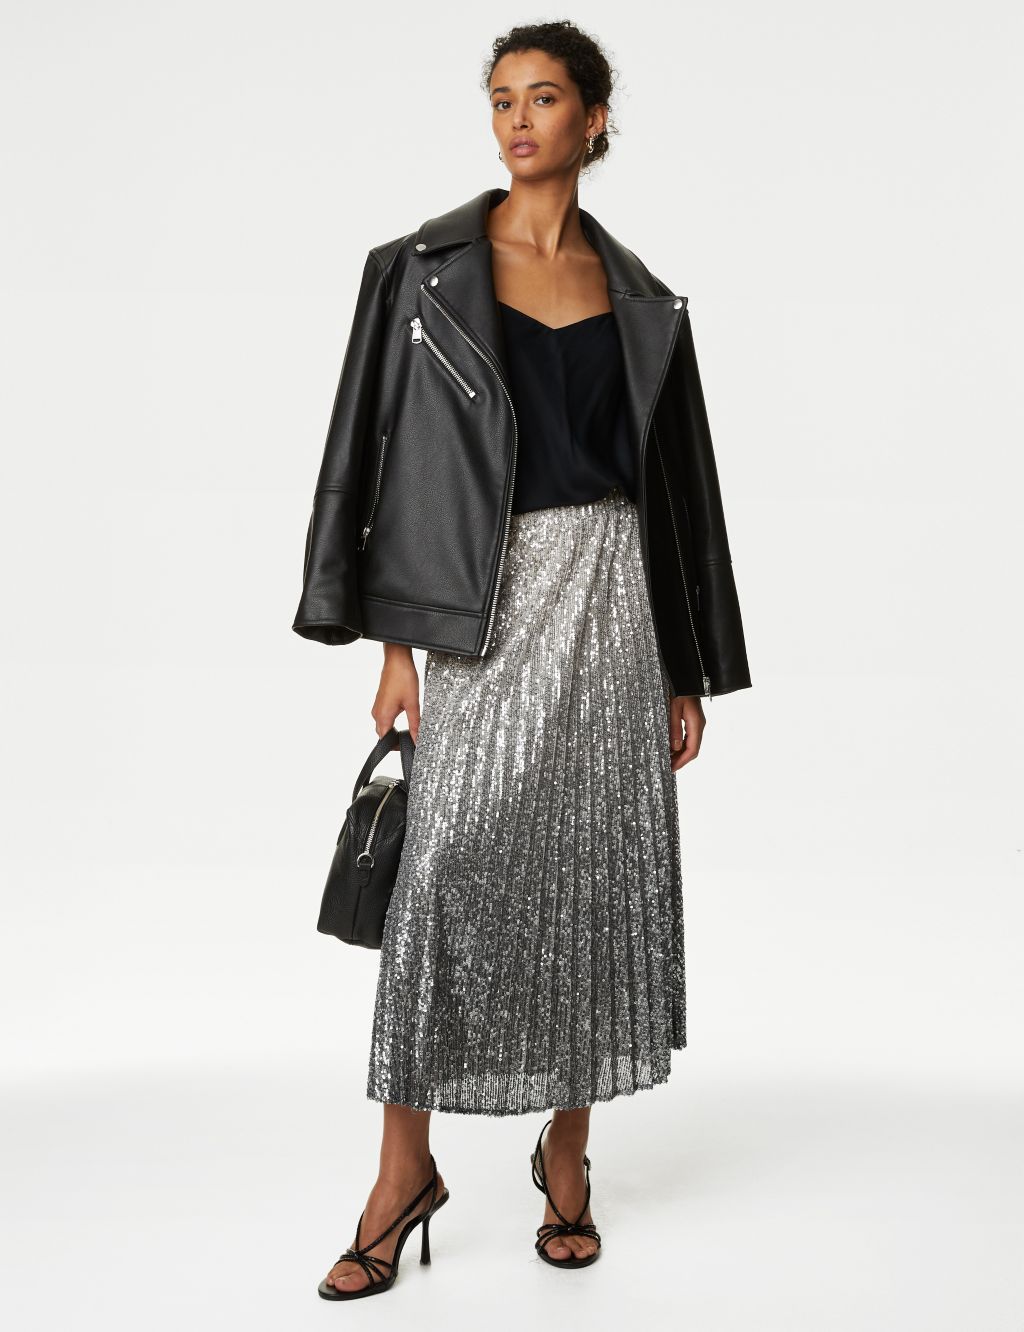 Sequin Ombre Pleated Midaxi Skirt image 1